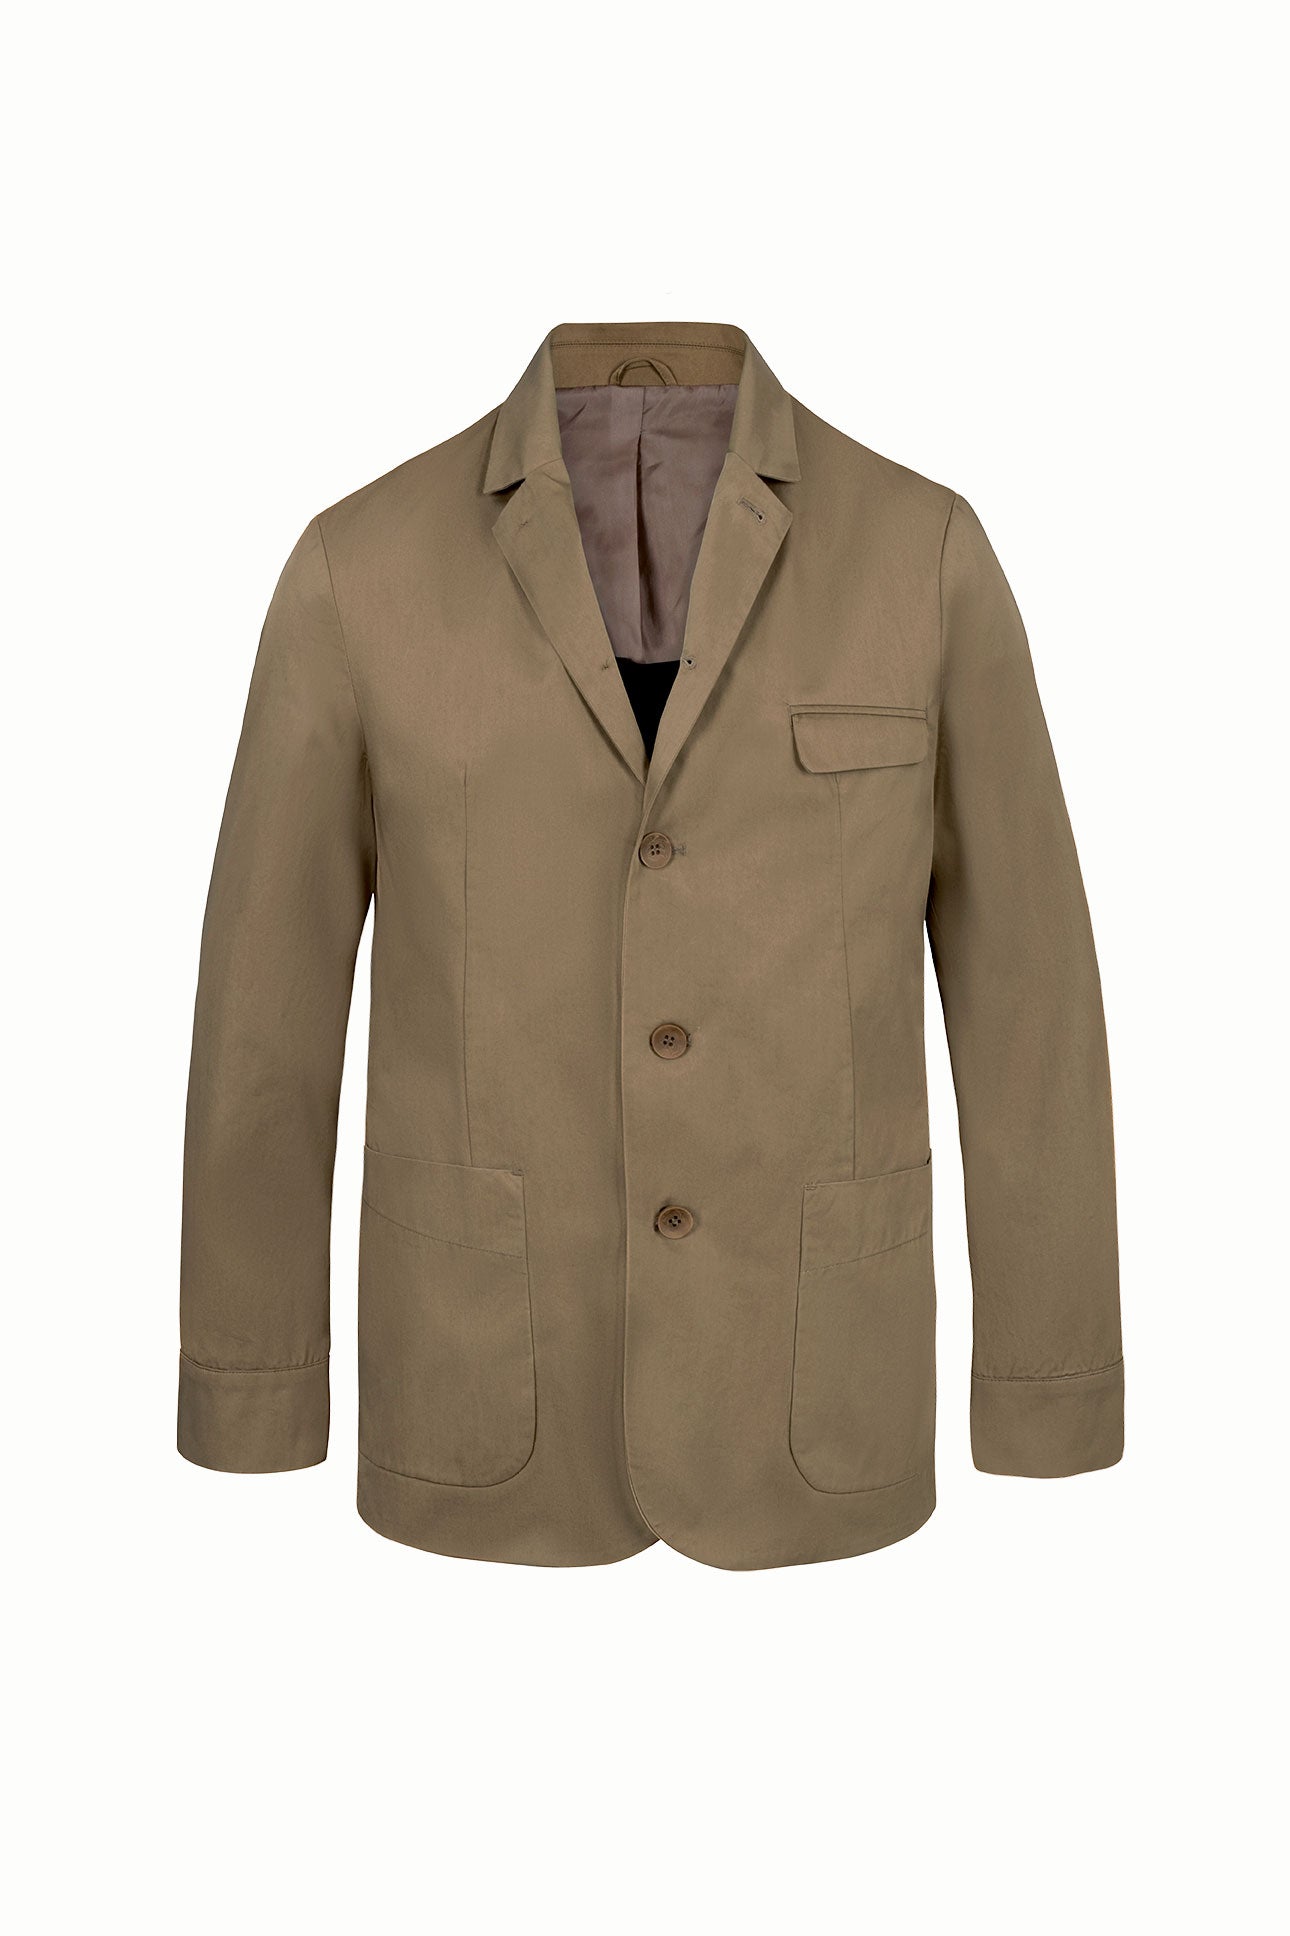 Andr1a Jacket aus Baumwolle in Tobacco